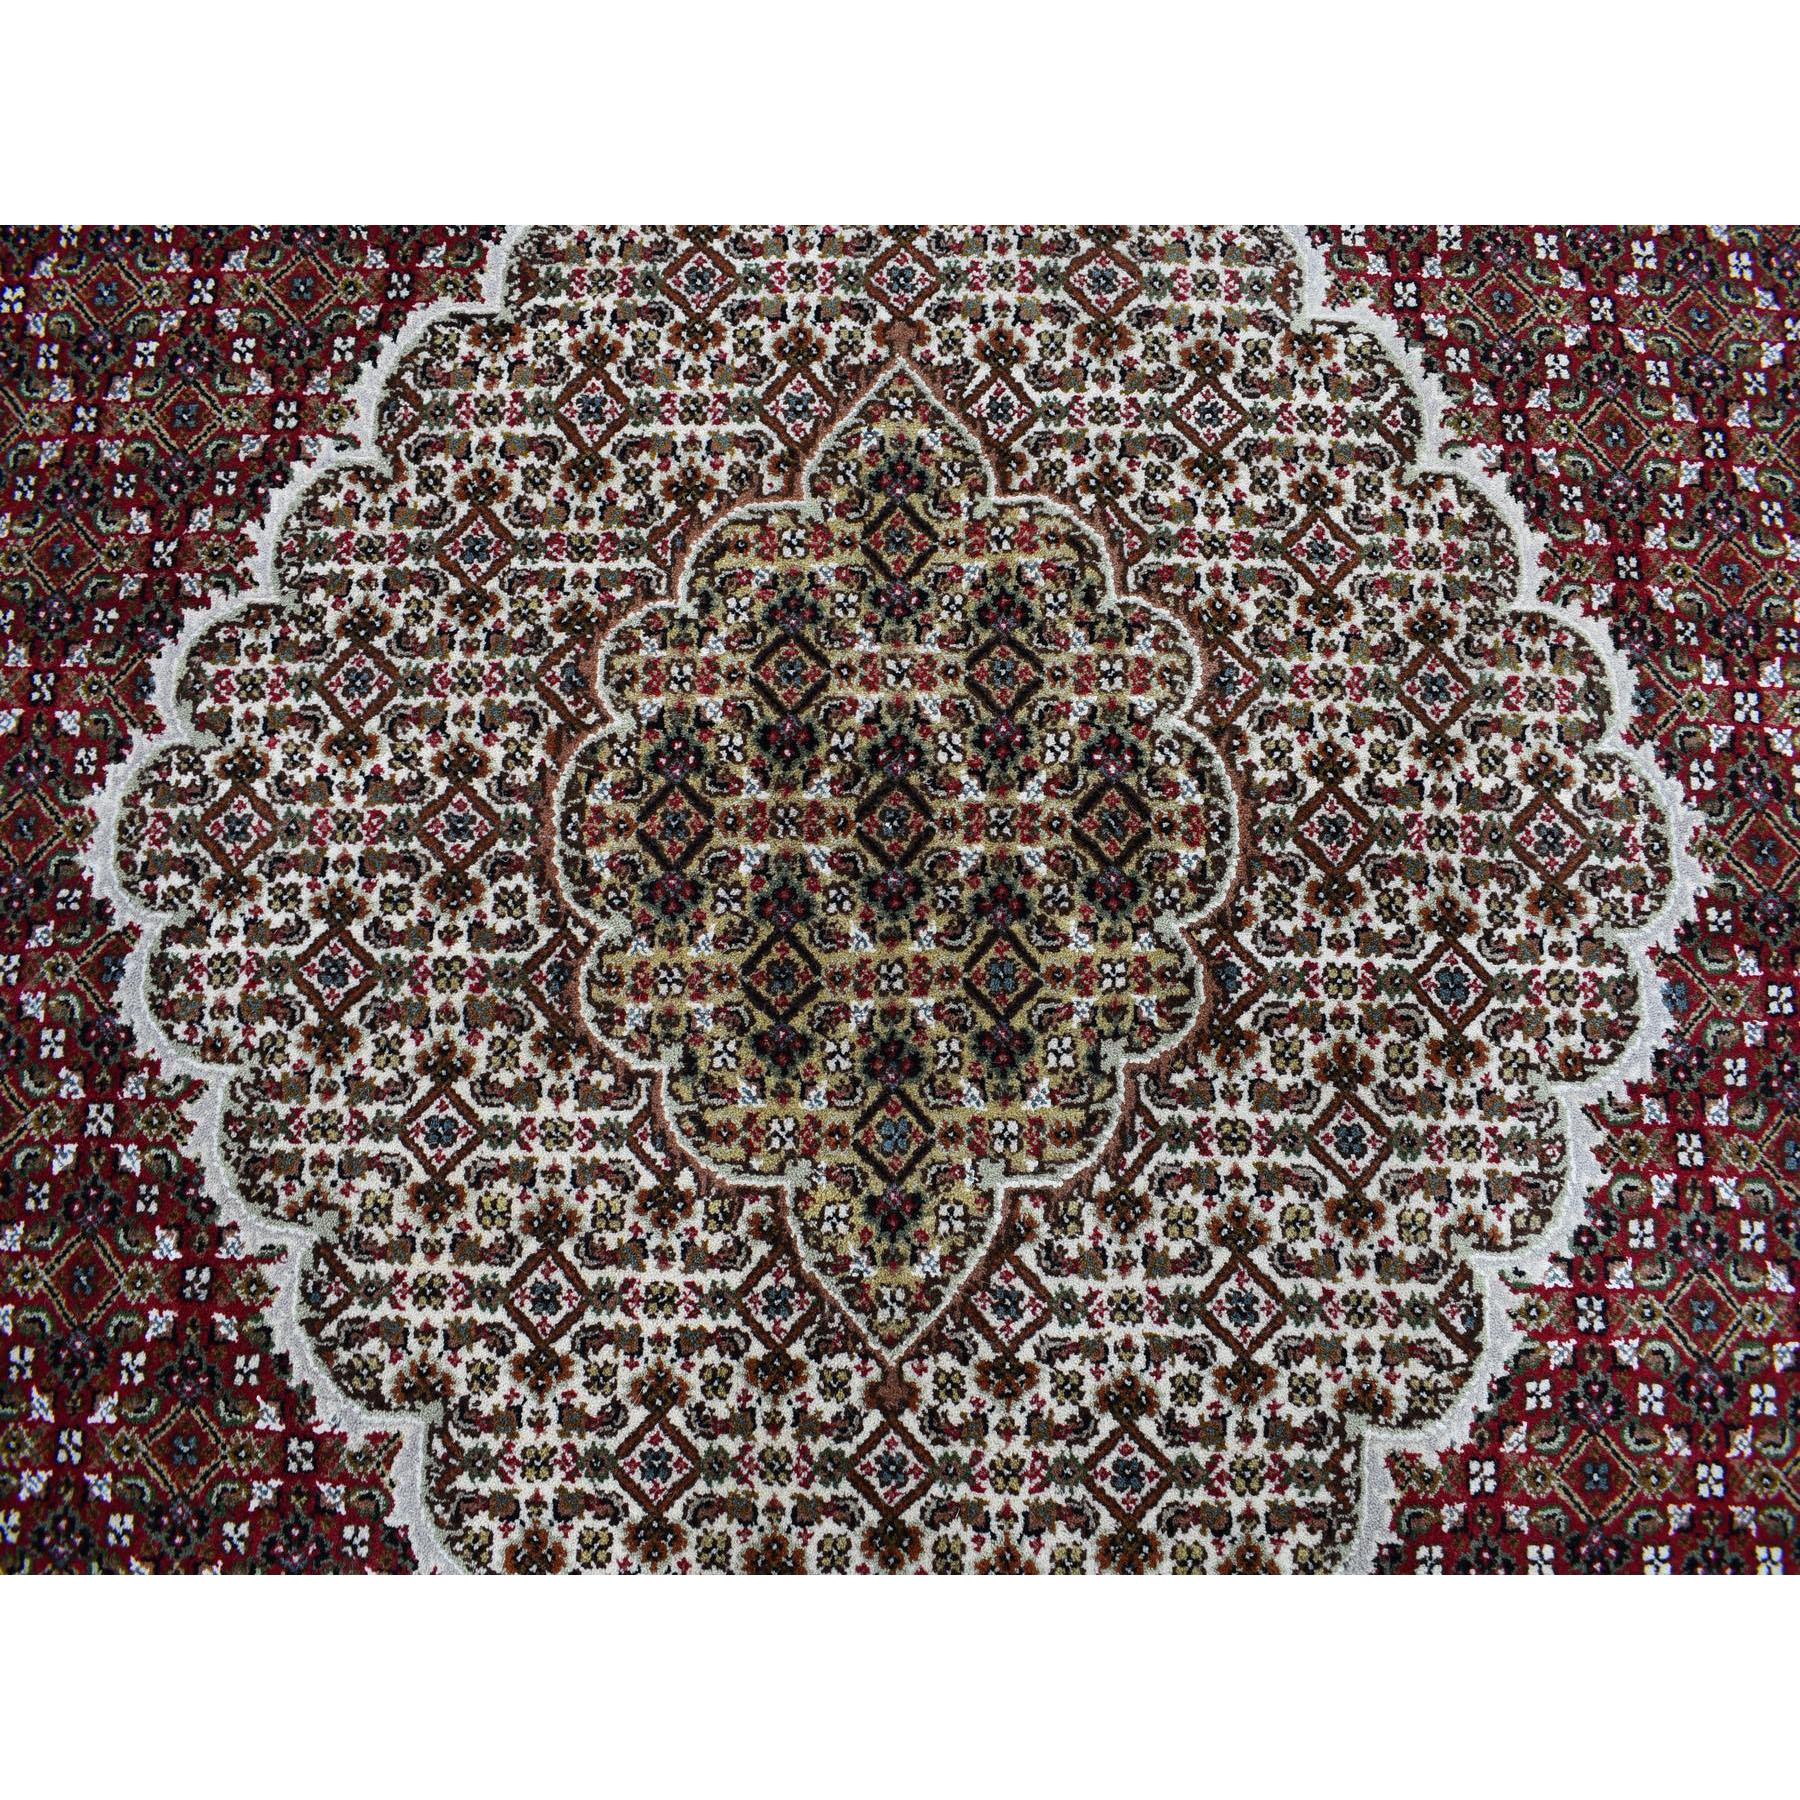 10-x10- Round Red Tabriz Mahi Wool and Silk Hand Knotted Oriental Rug 